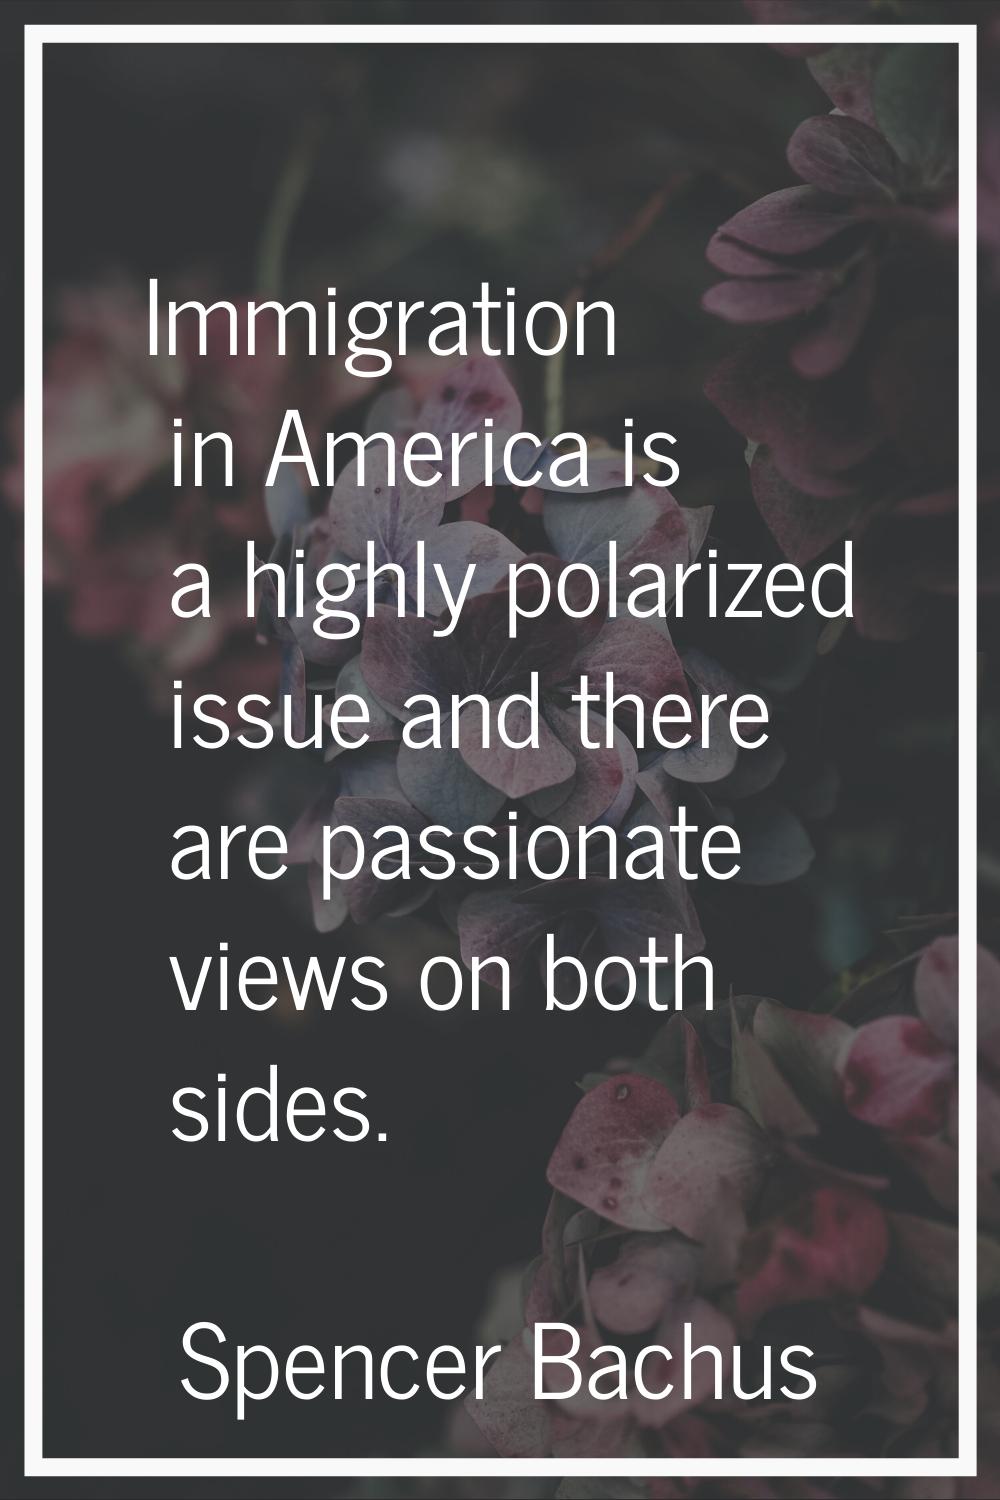 Immigration in America is a highly polarized issue and there are passionate views on both sides.